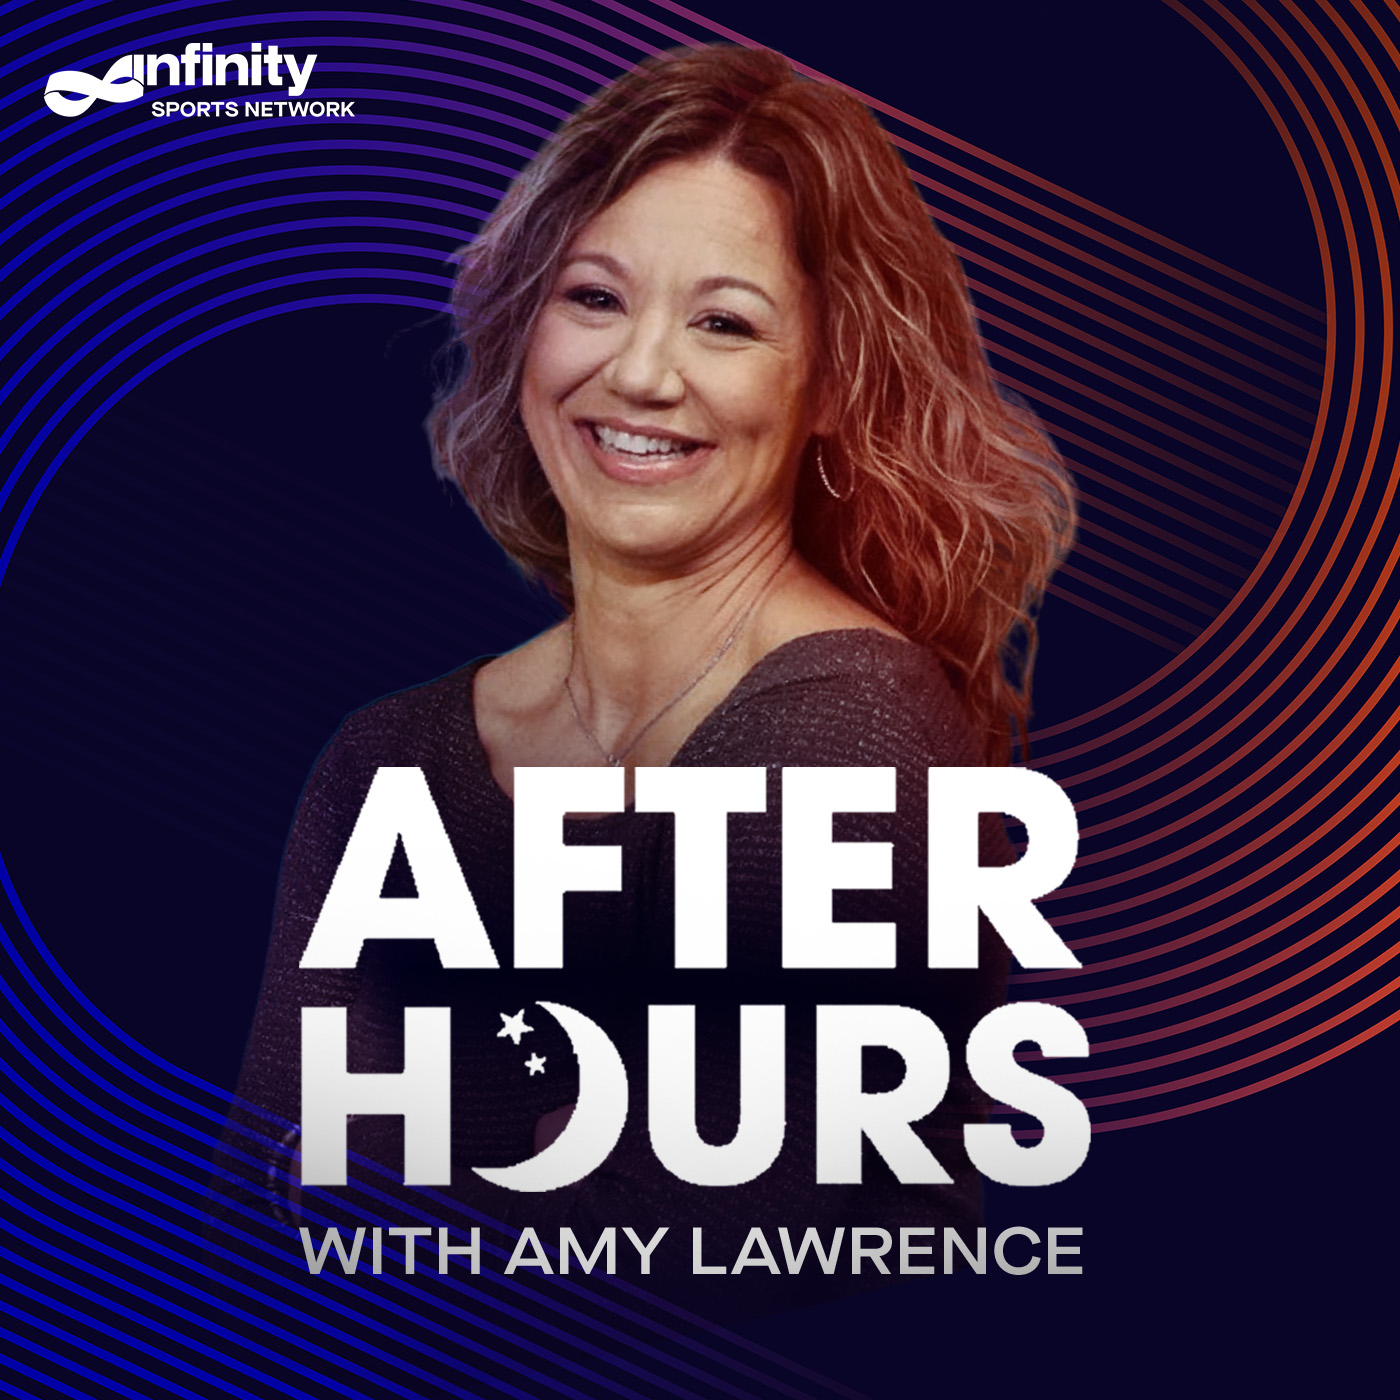 07/30/21 After Hours with Amy Lawrence PODCAST: Hour 4